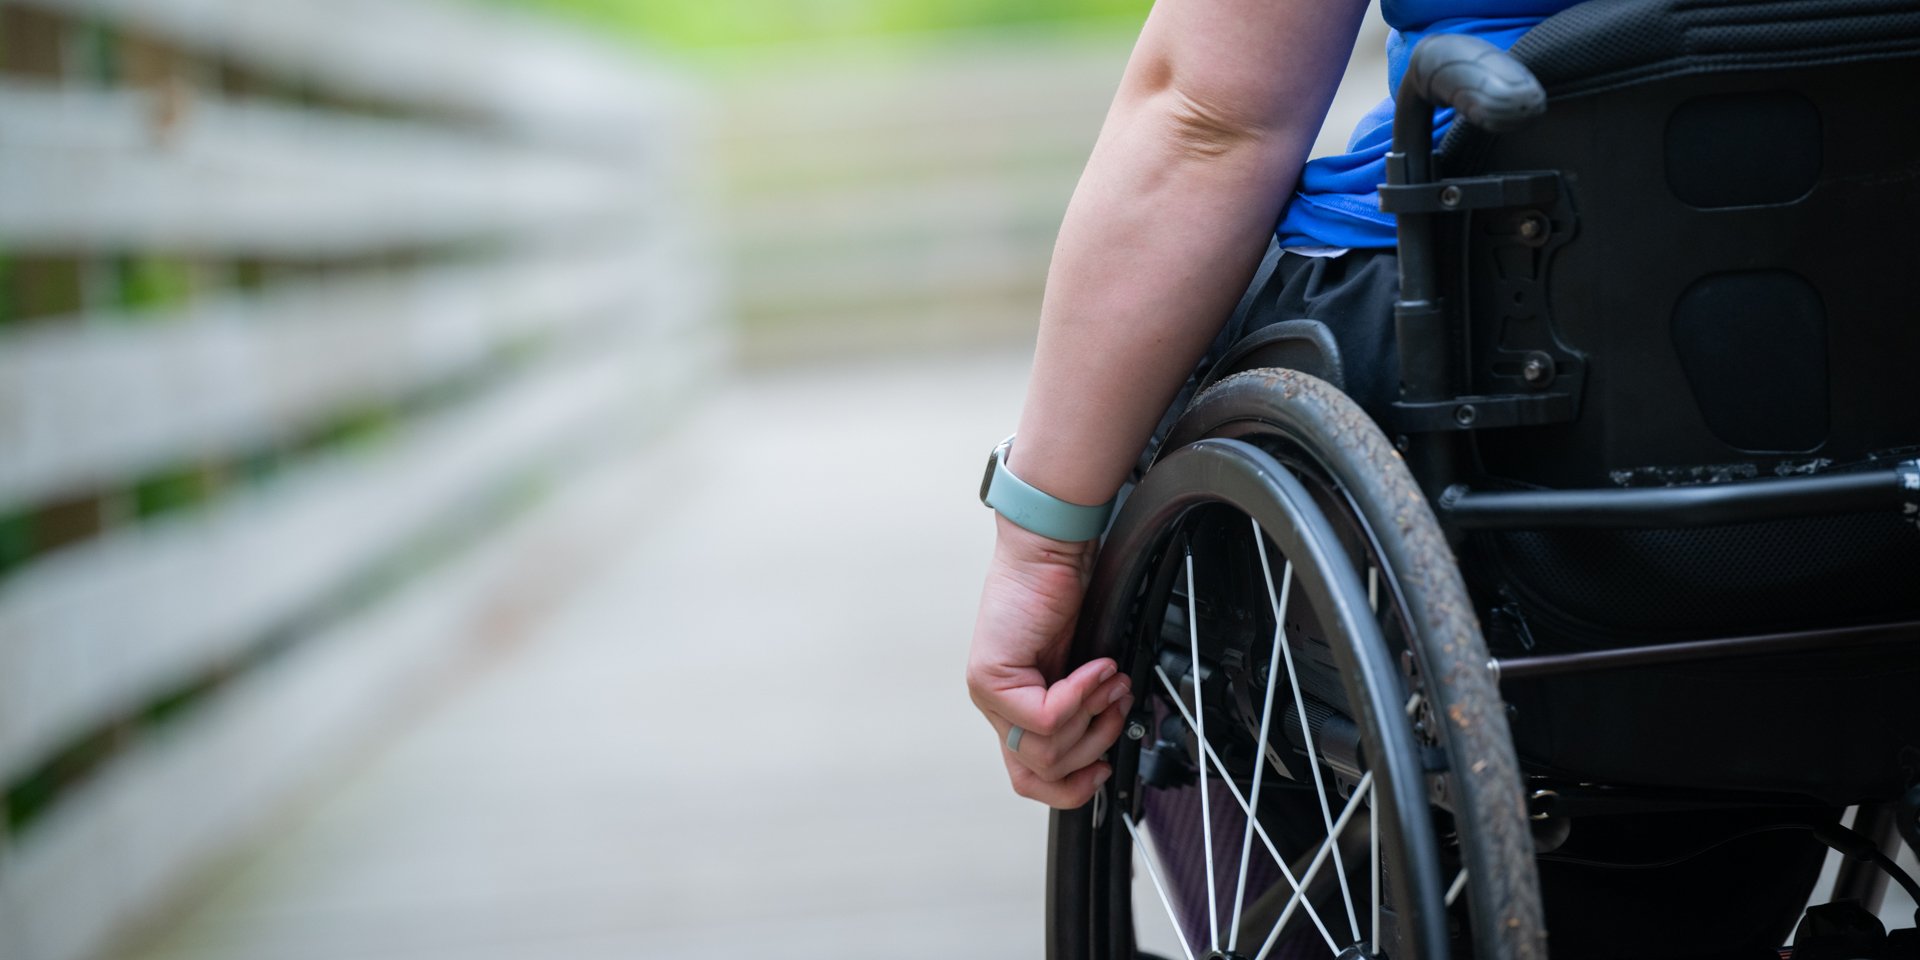 A close-up, cropped photo of a person seated in a wheelchair with their hand on the wheel, using the accessible All Persons Trail boardwalk